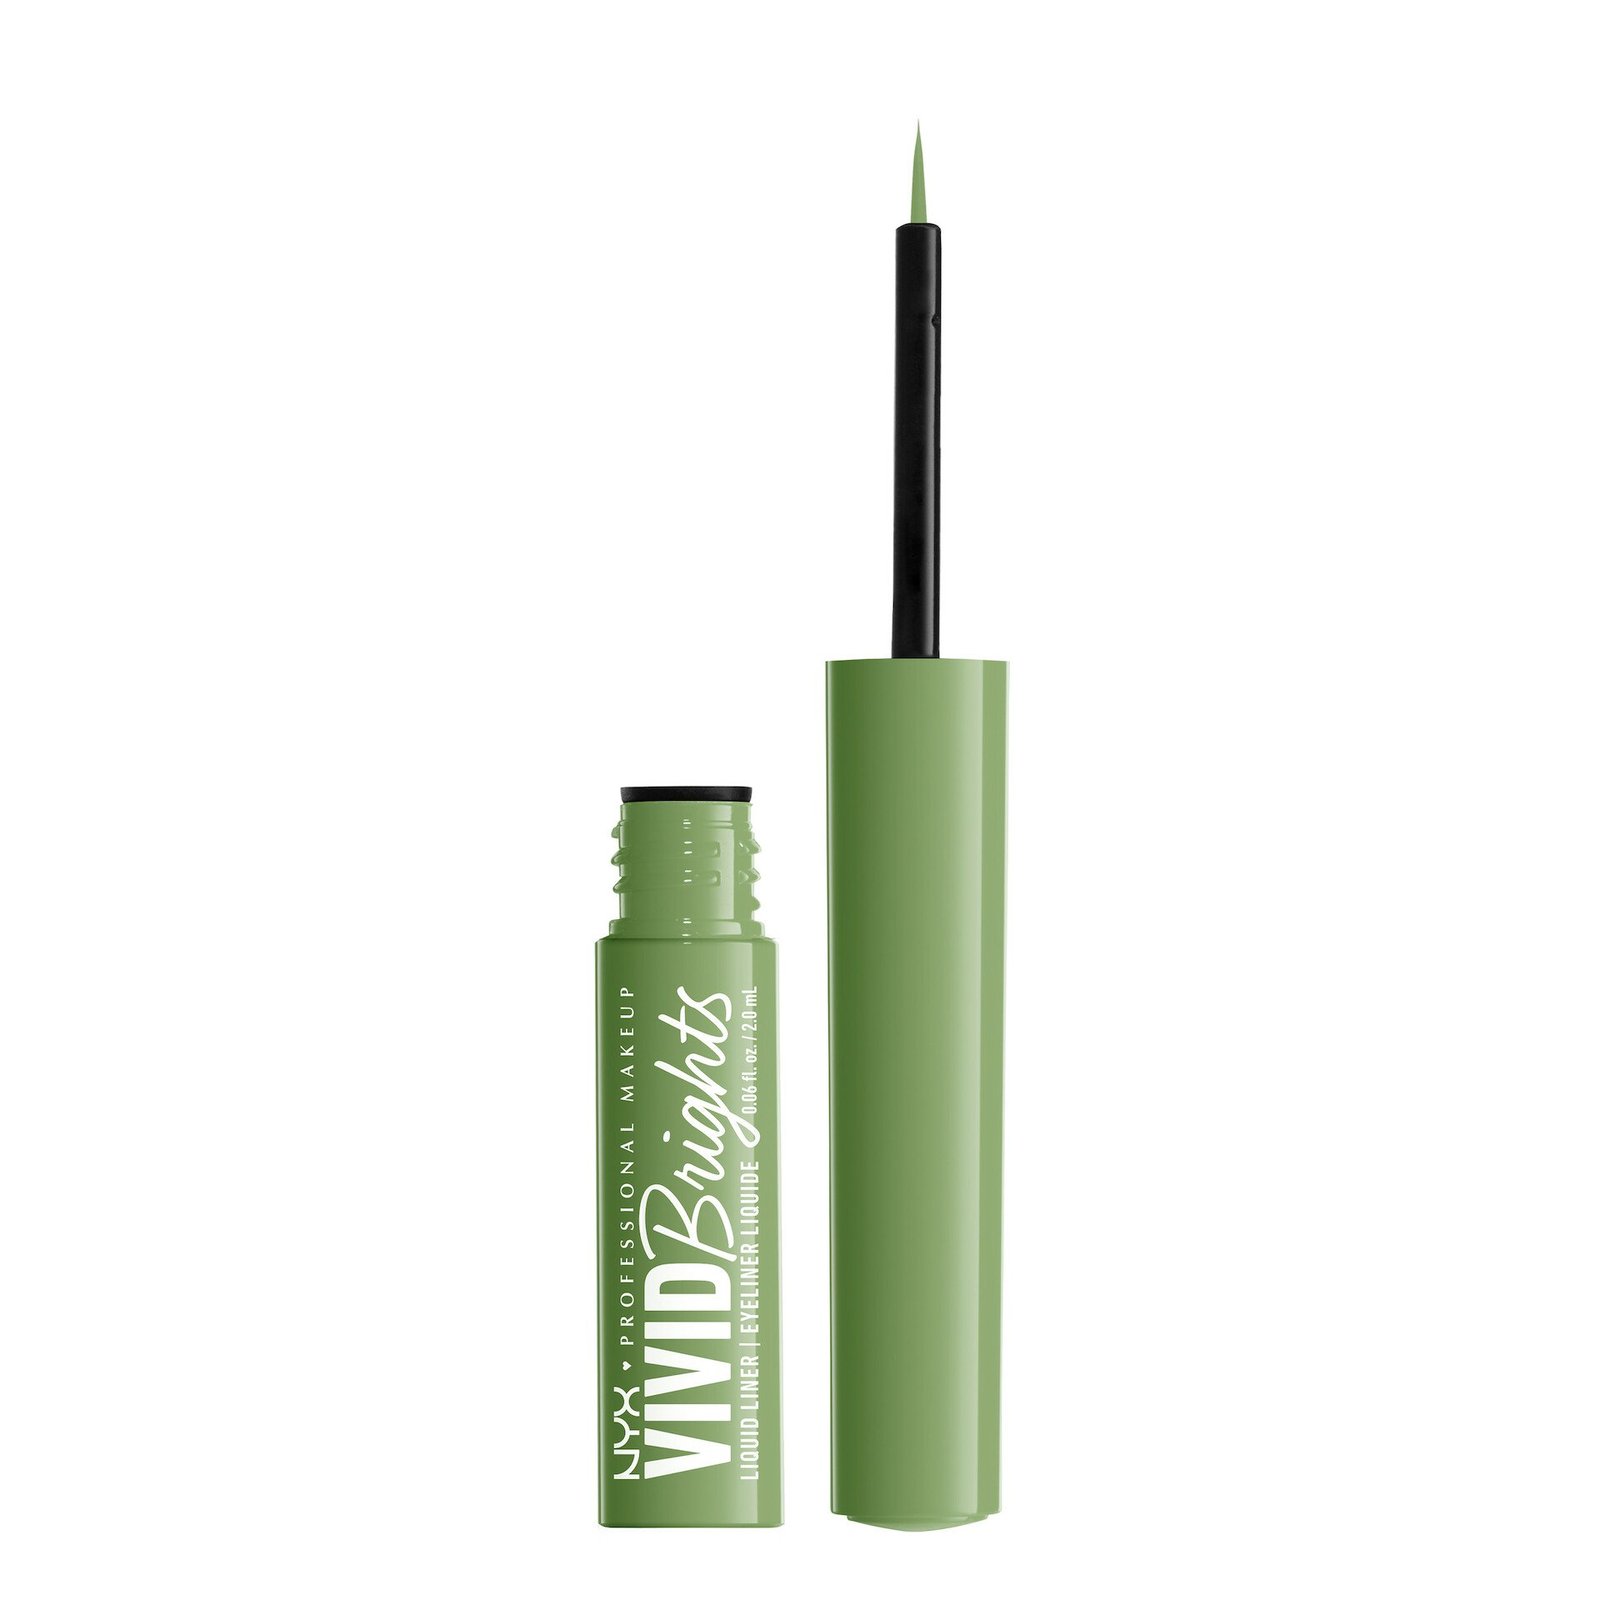 NYX Professional Makeup Vivid Bright Liquid Liner 02 Ghosted Green 2 ml